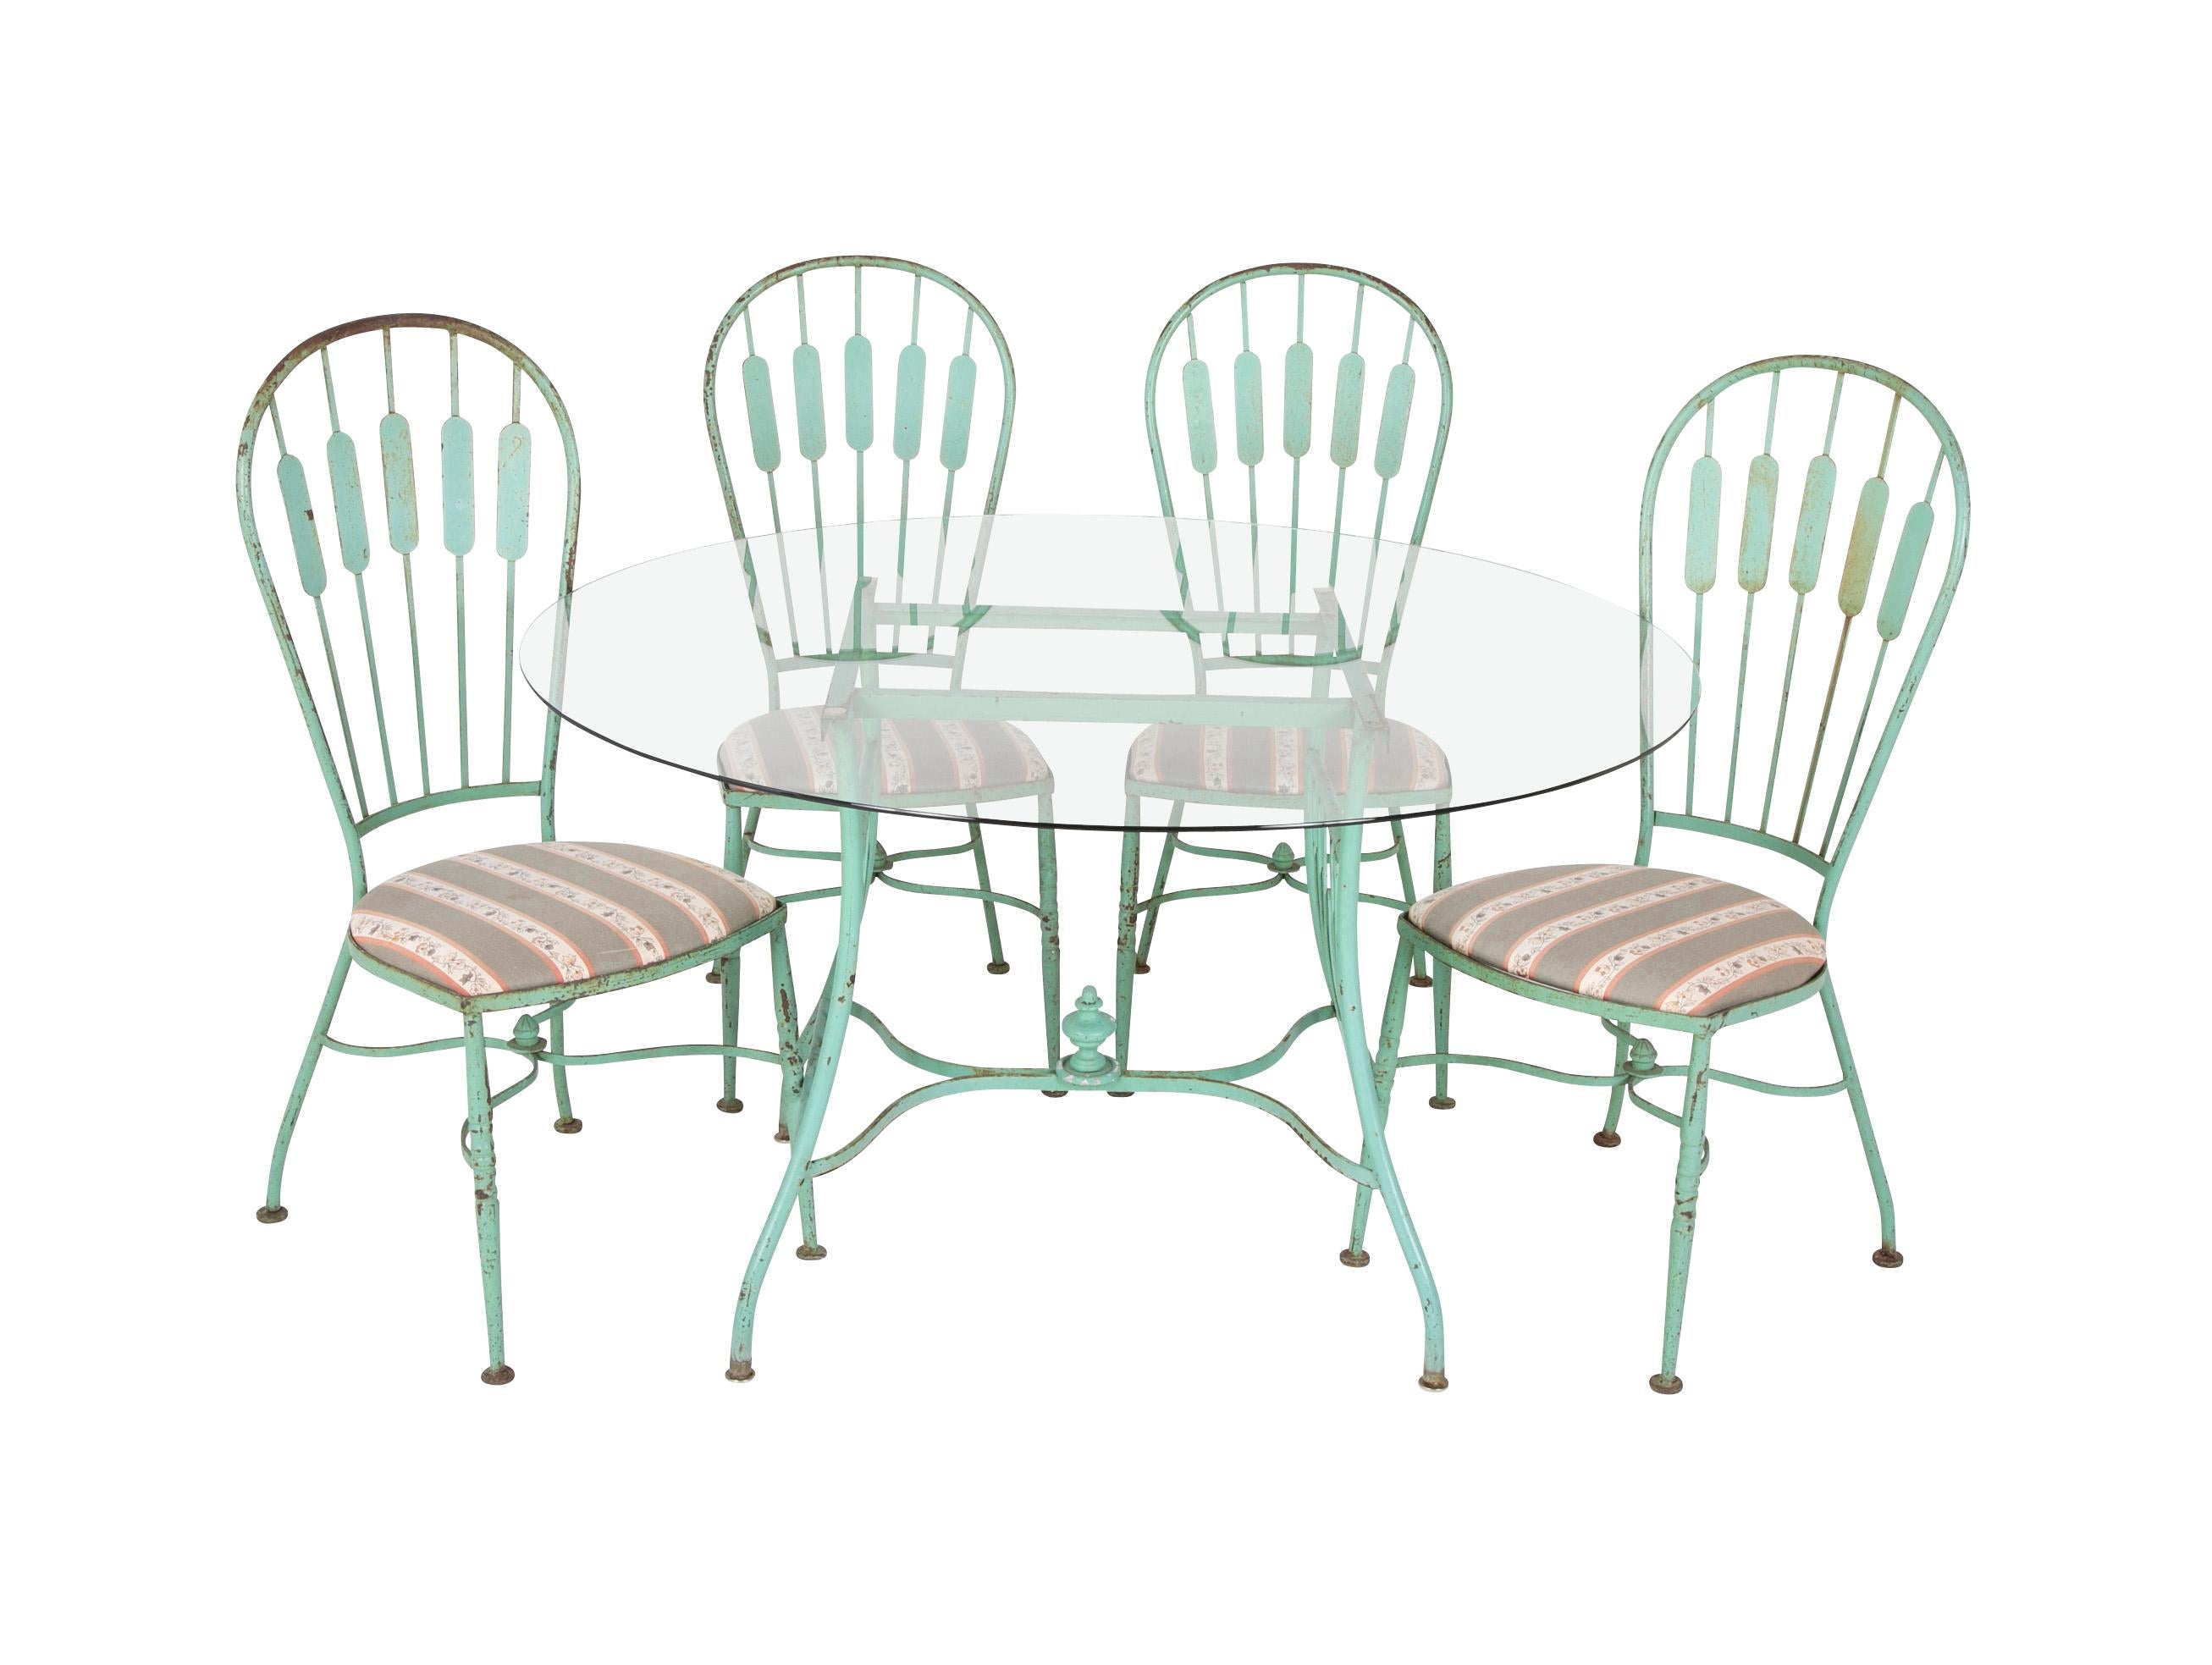 A 19th century French iron glass top dining table with four matching chairs. From Isleboro, Maine estate of a noted collector. Table dimensions: 27.75